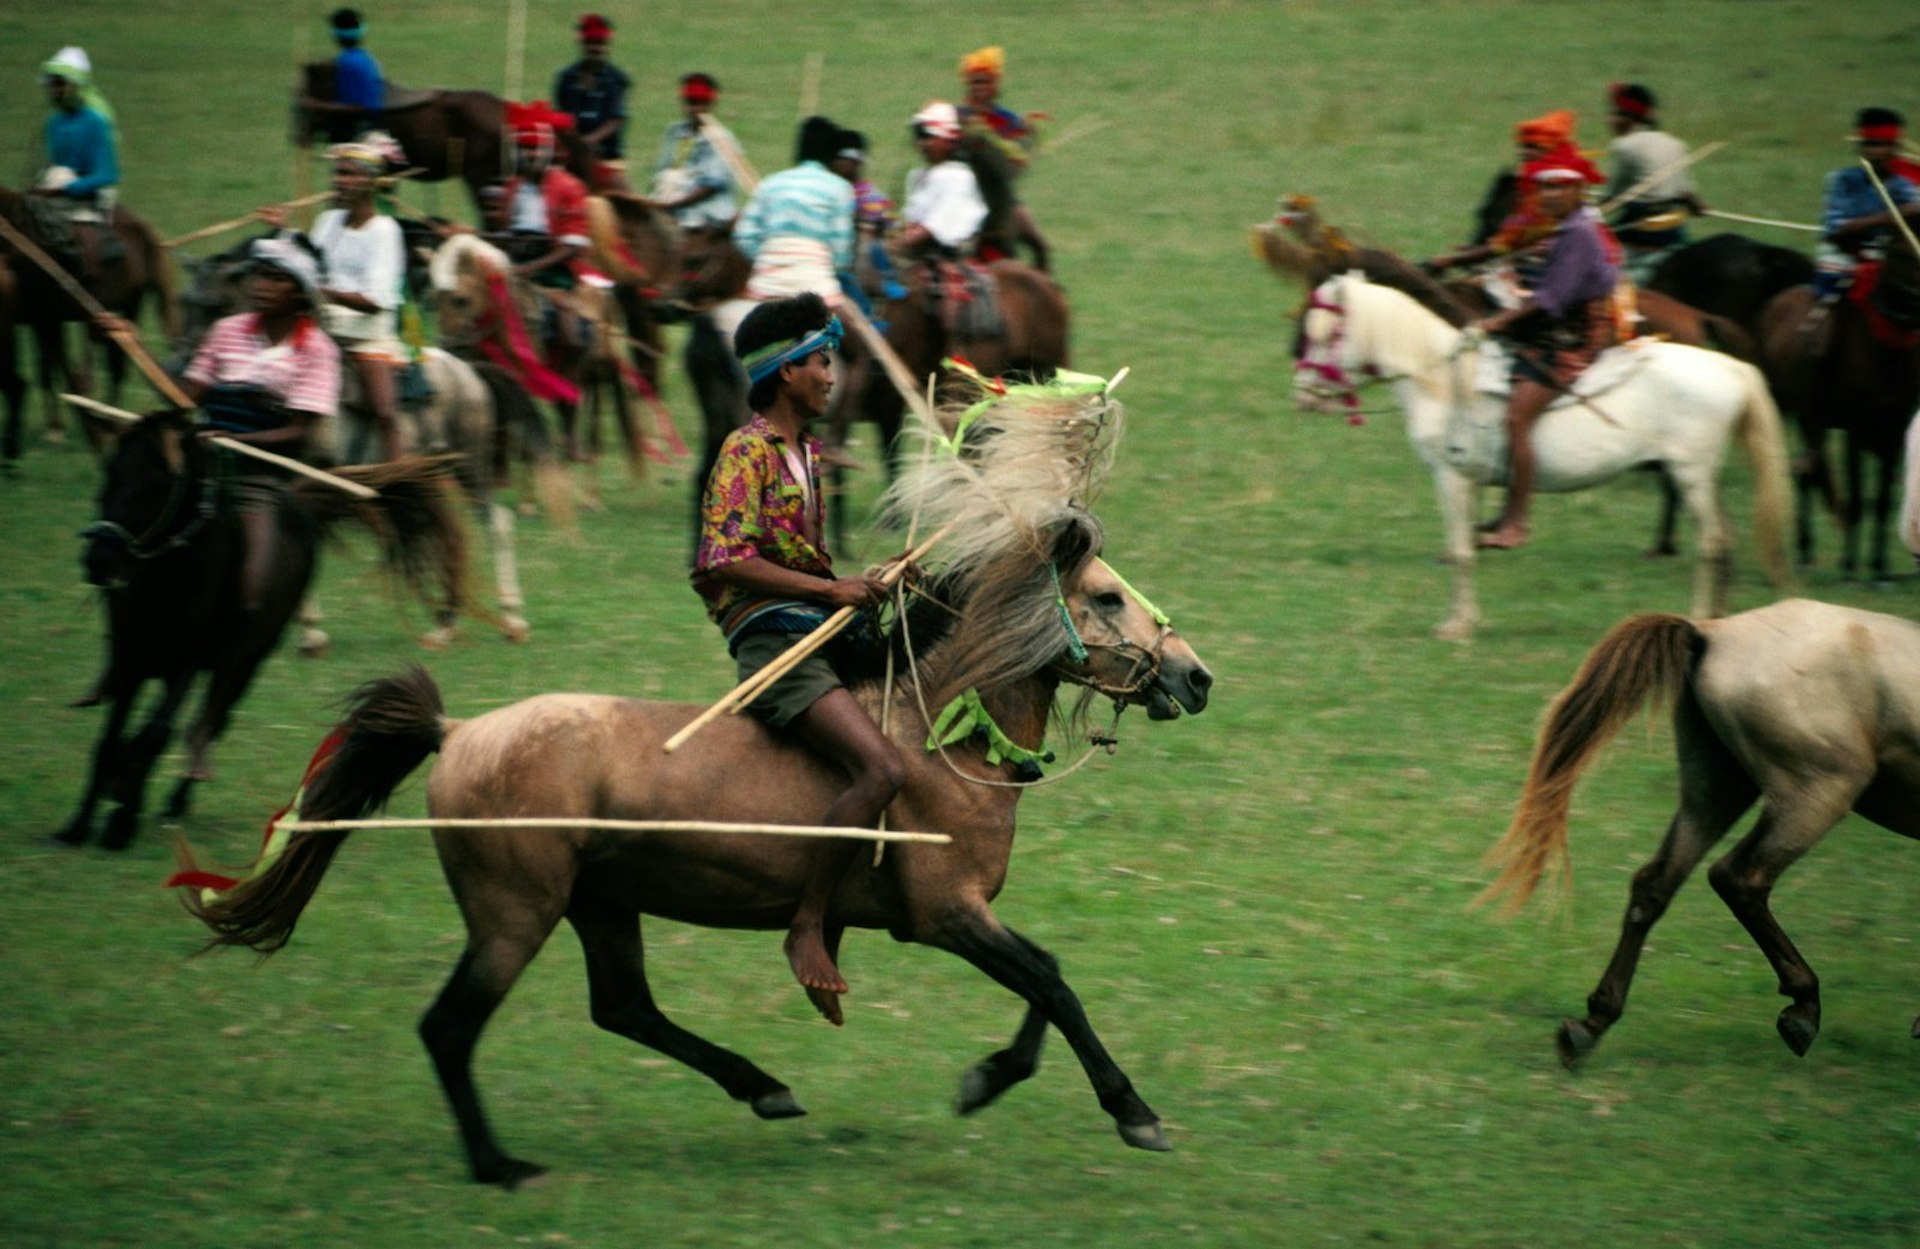 Horsemen and flying spears at the annual festival of Pasola in Sumba, East Nusa Tenggara, Indonesia